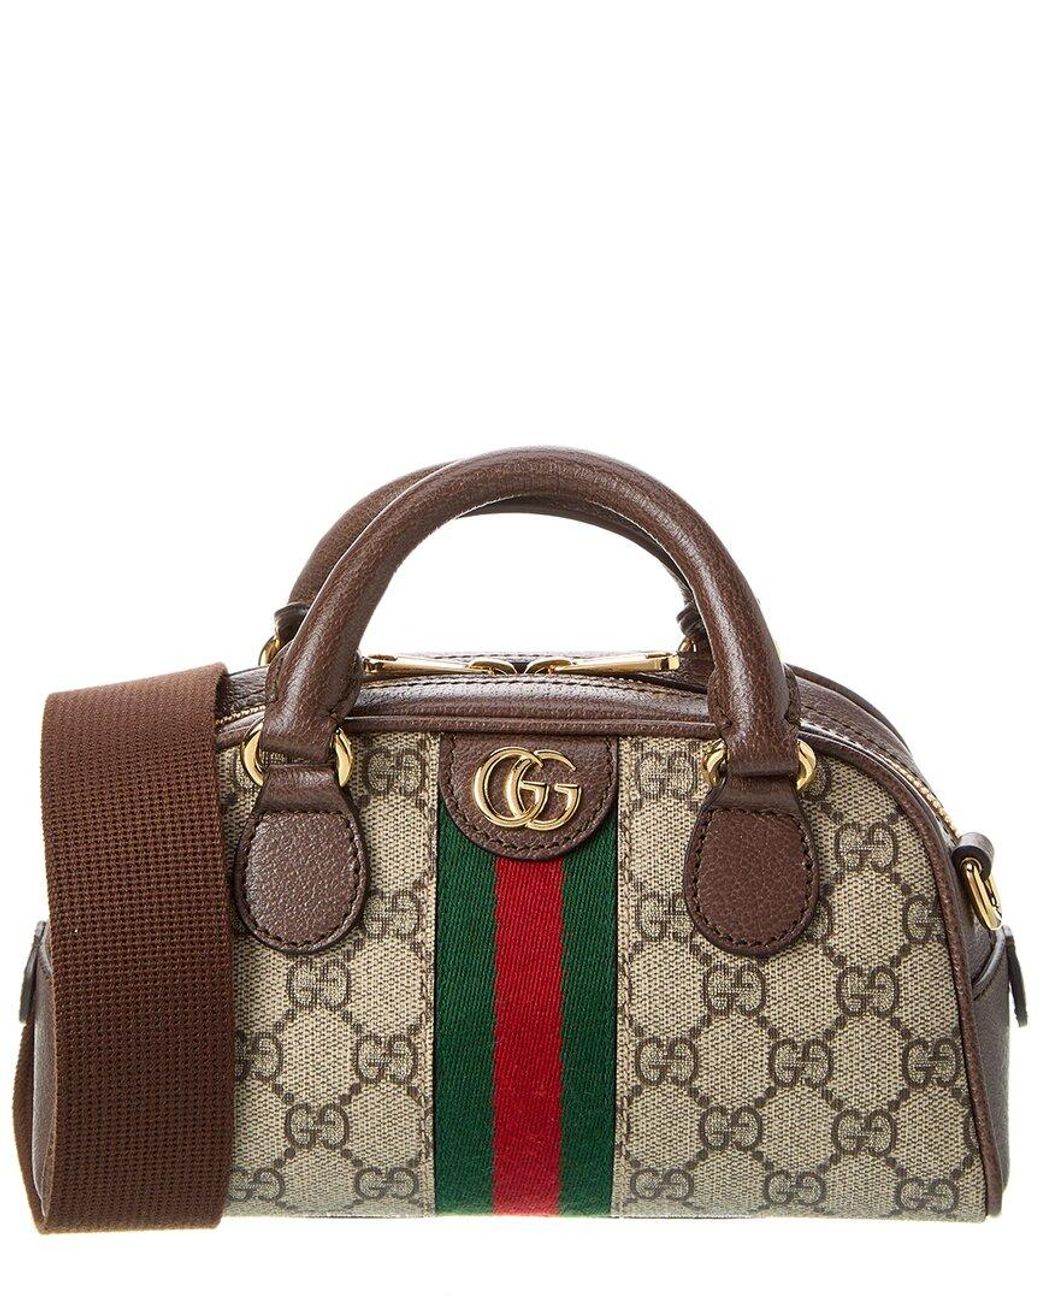 Gucci Ophidia Mini GG Supreme Canvas & Leather Shoulder Bag in Brown | Lyst